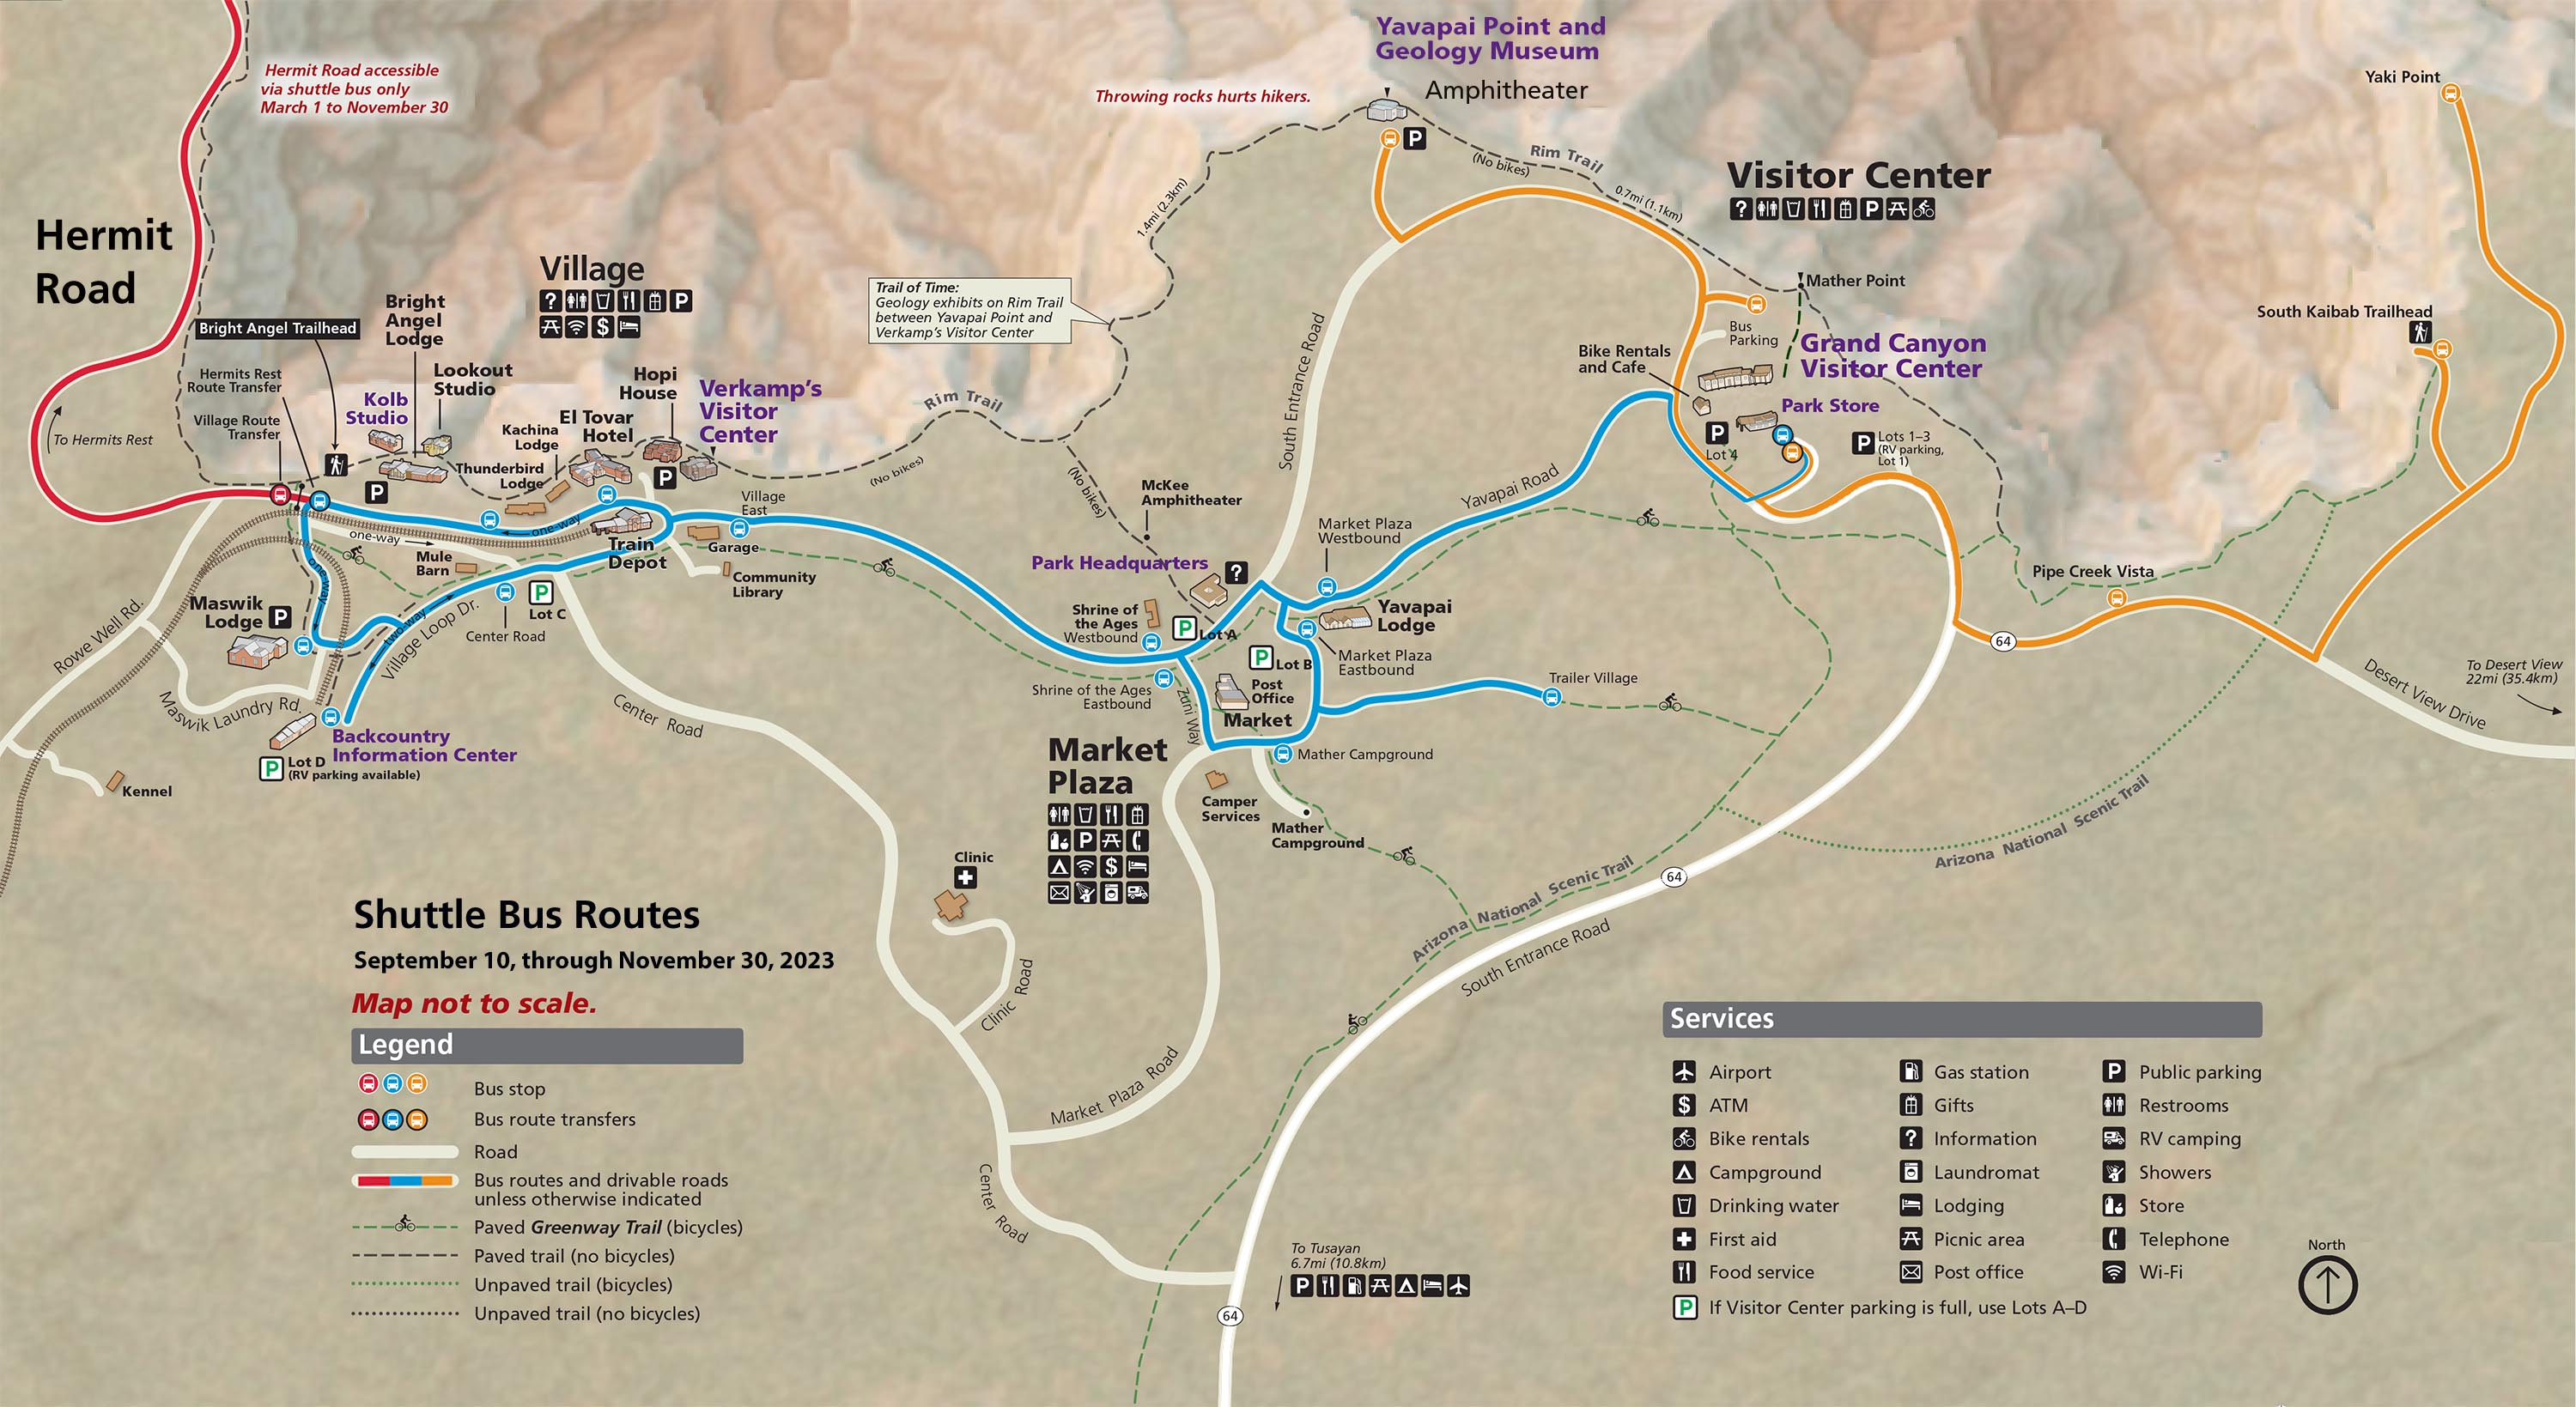 Grand Canyon National Park Lodges - Live, Work, and Explore at the